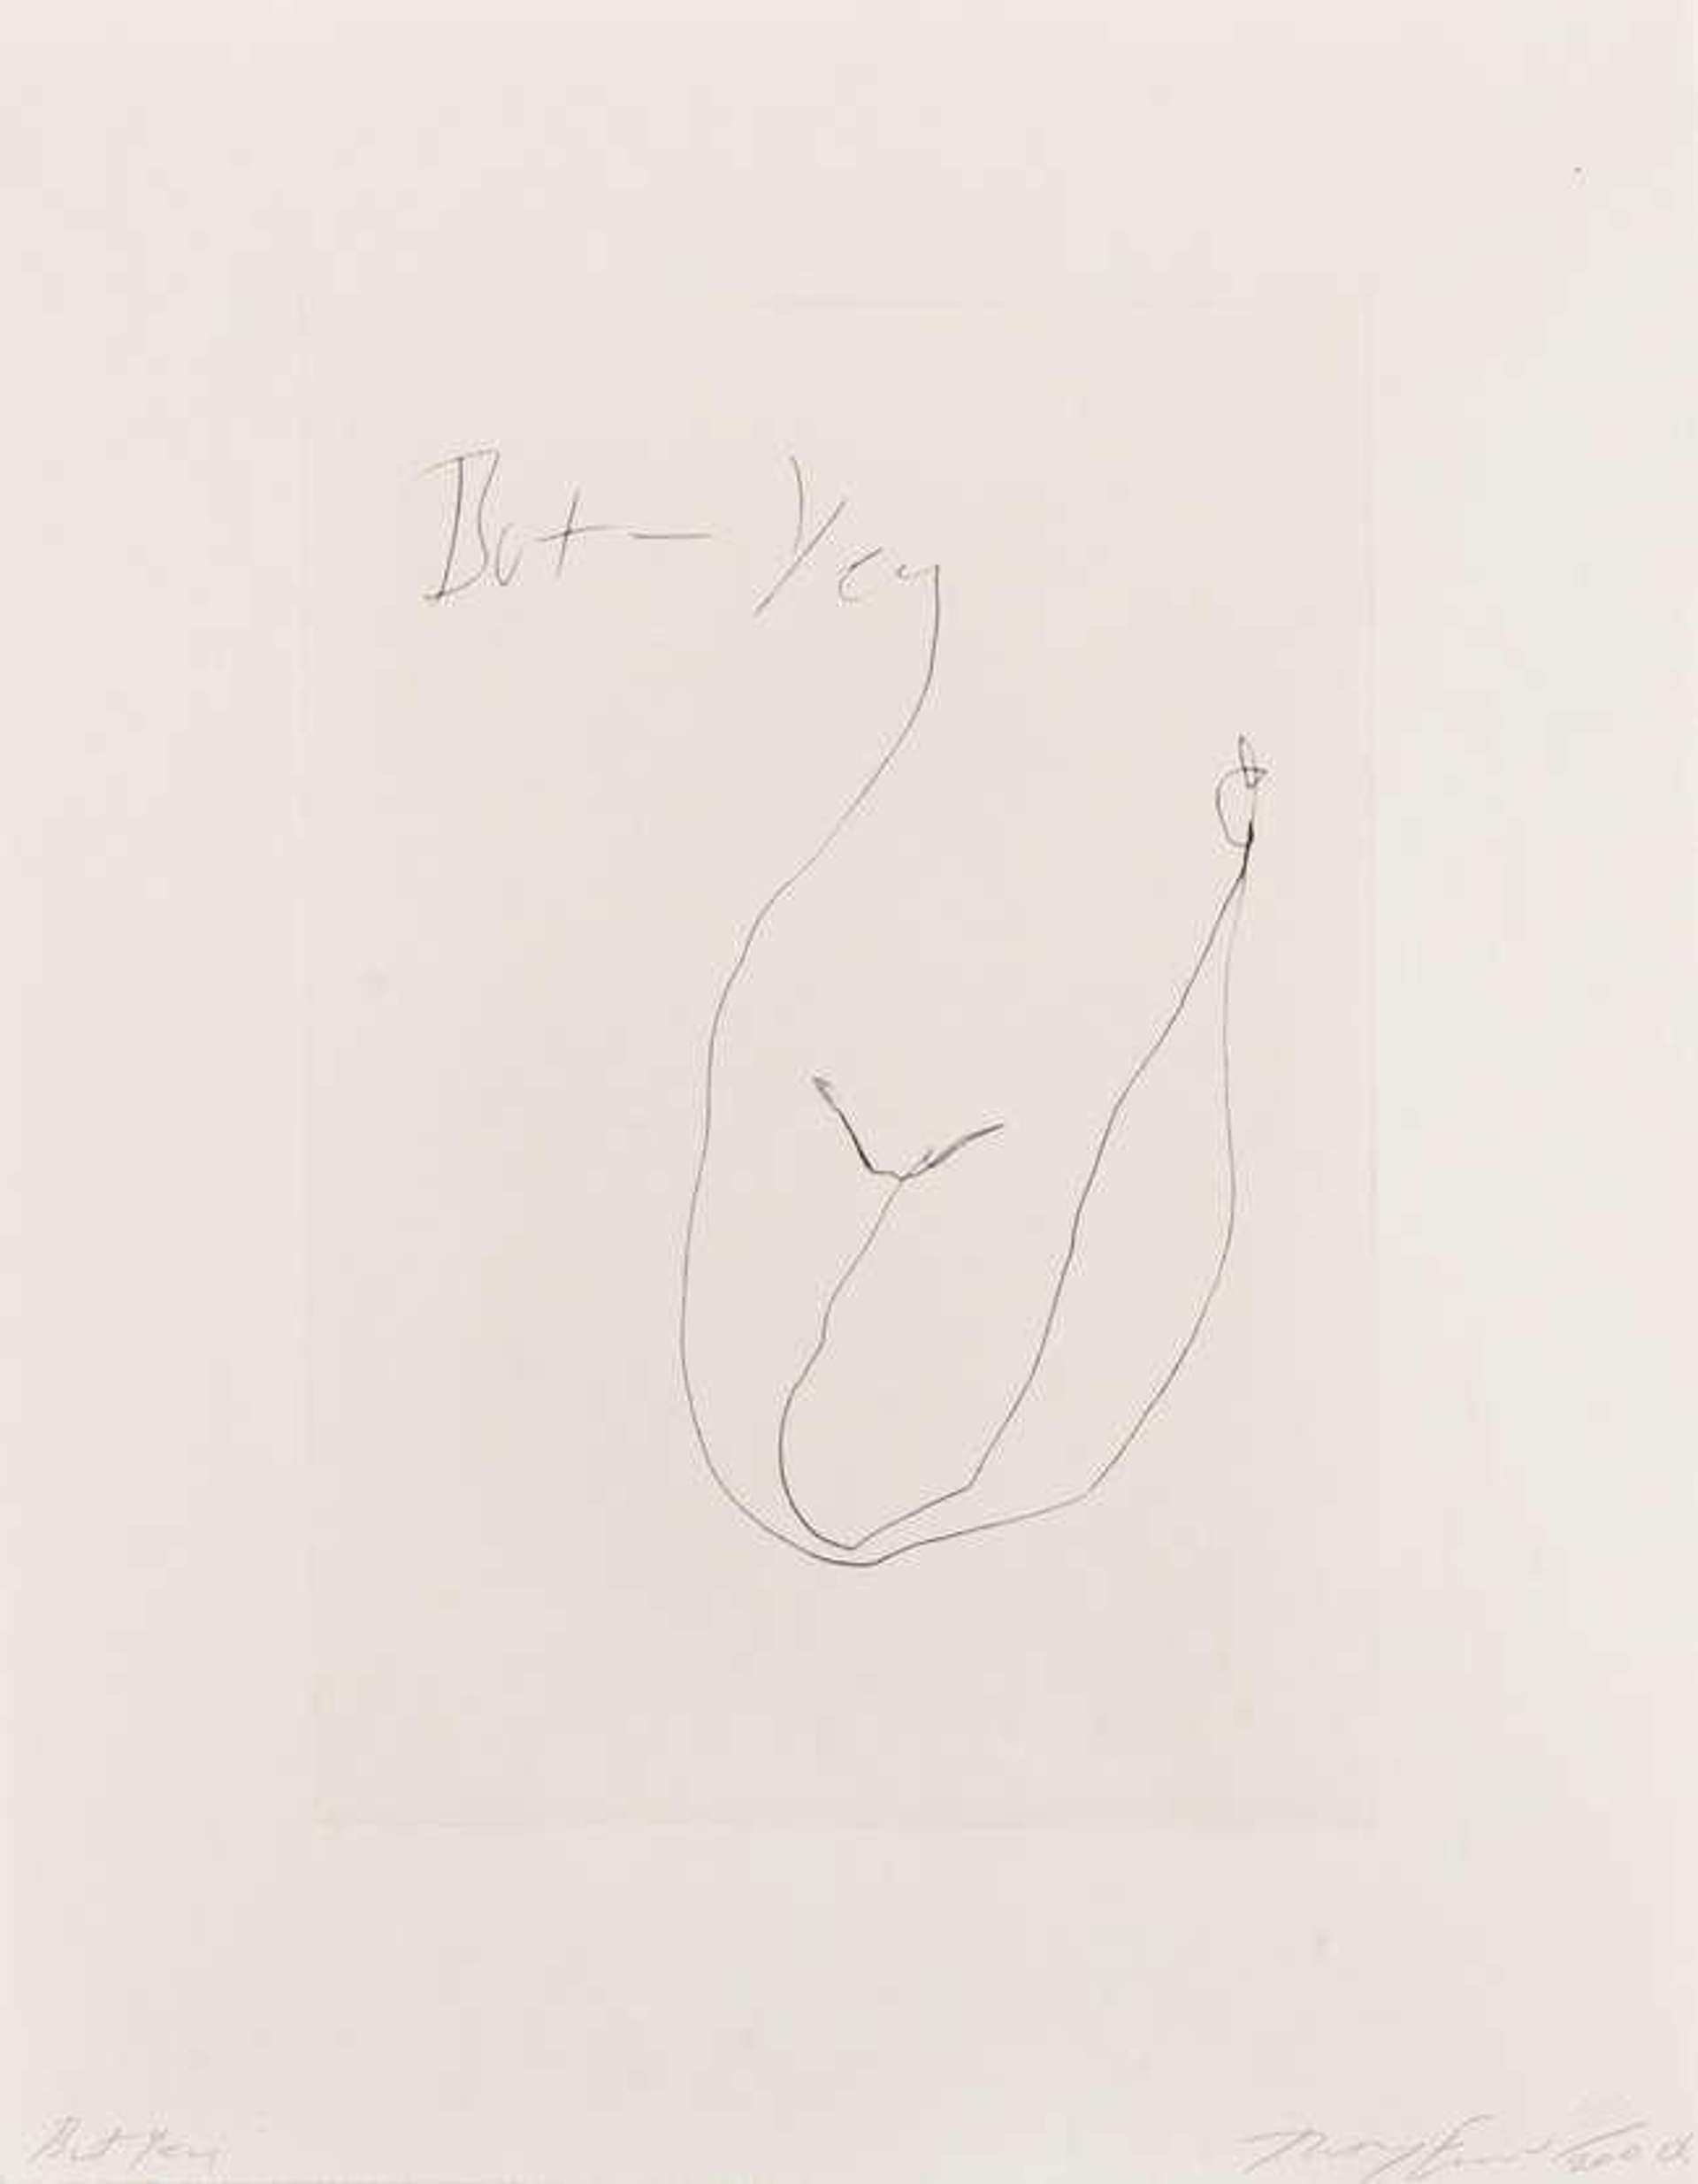 Tracey Emin: But Yeh - Signed Print